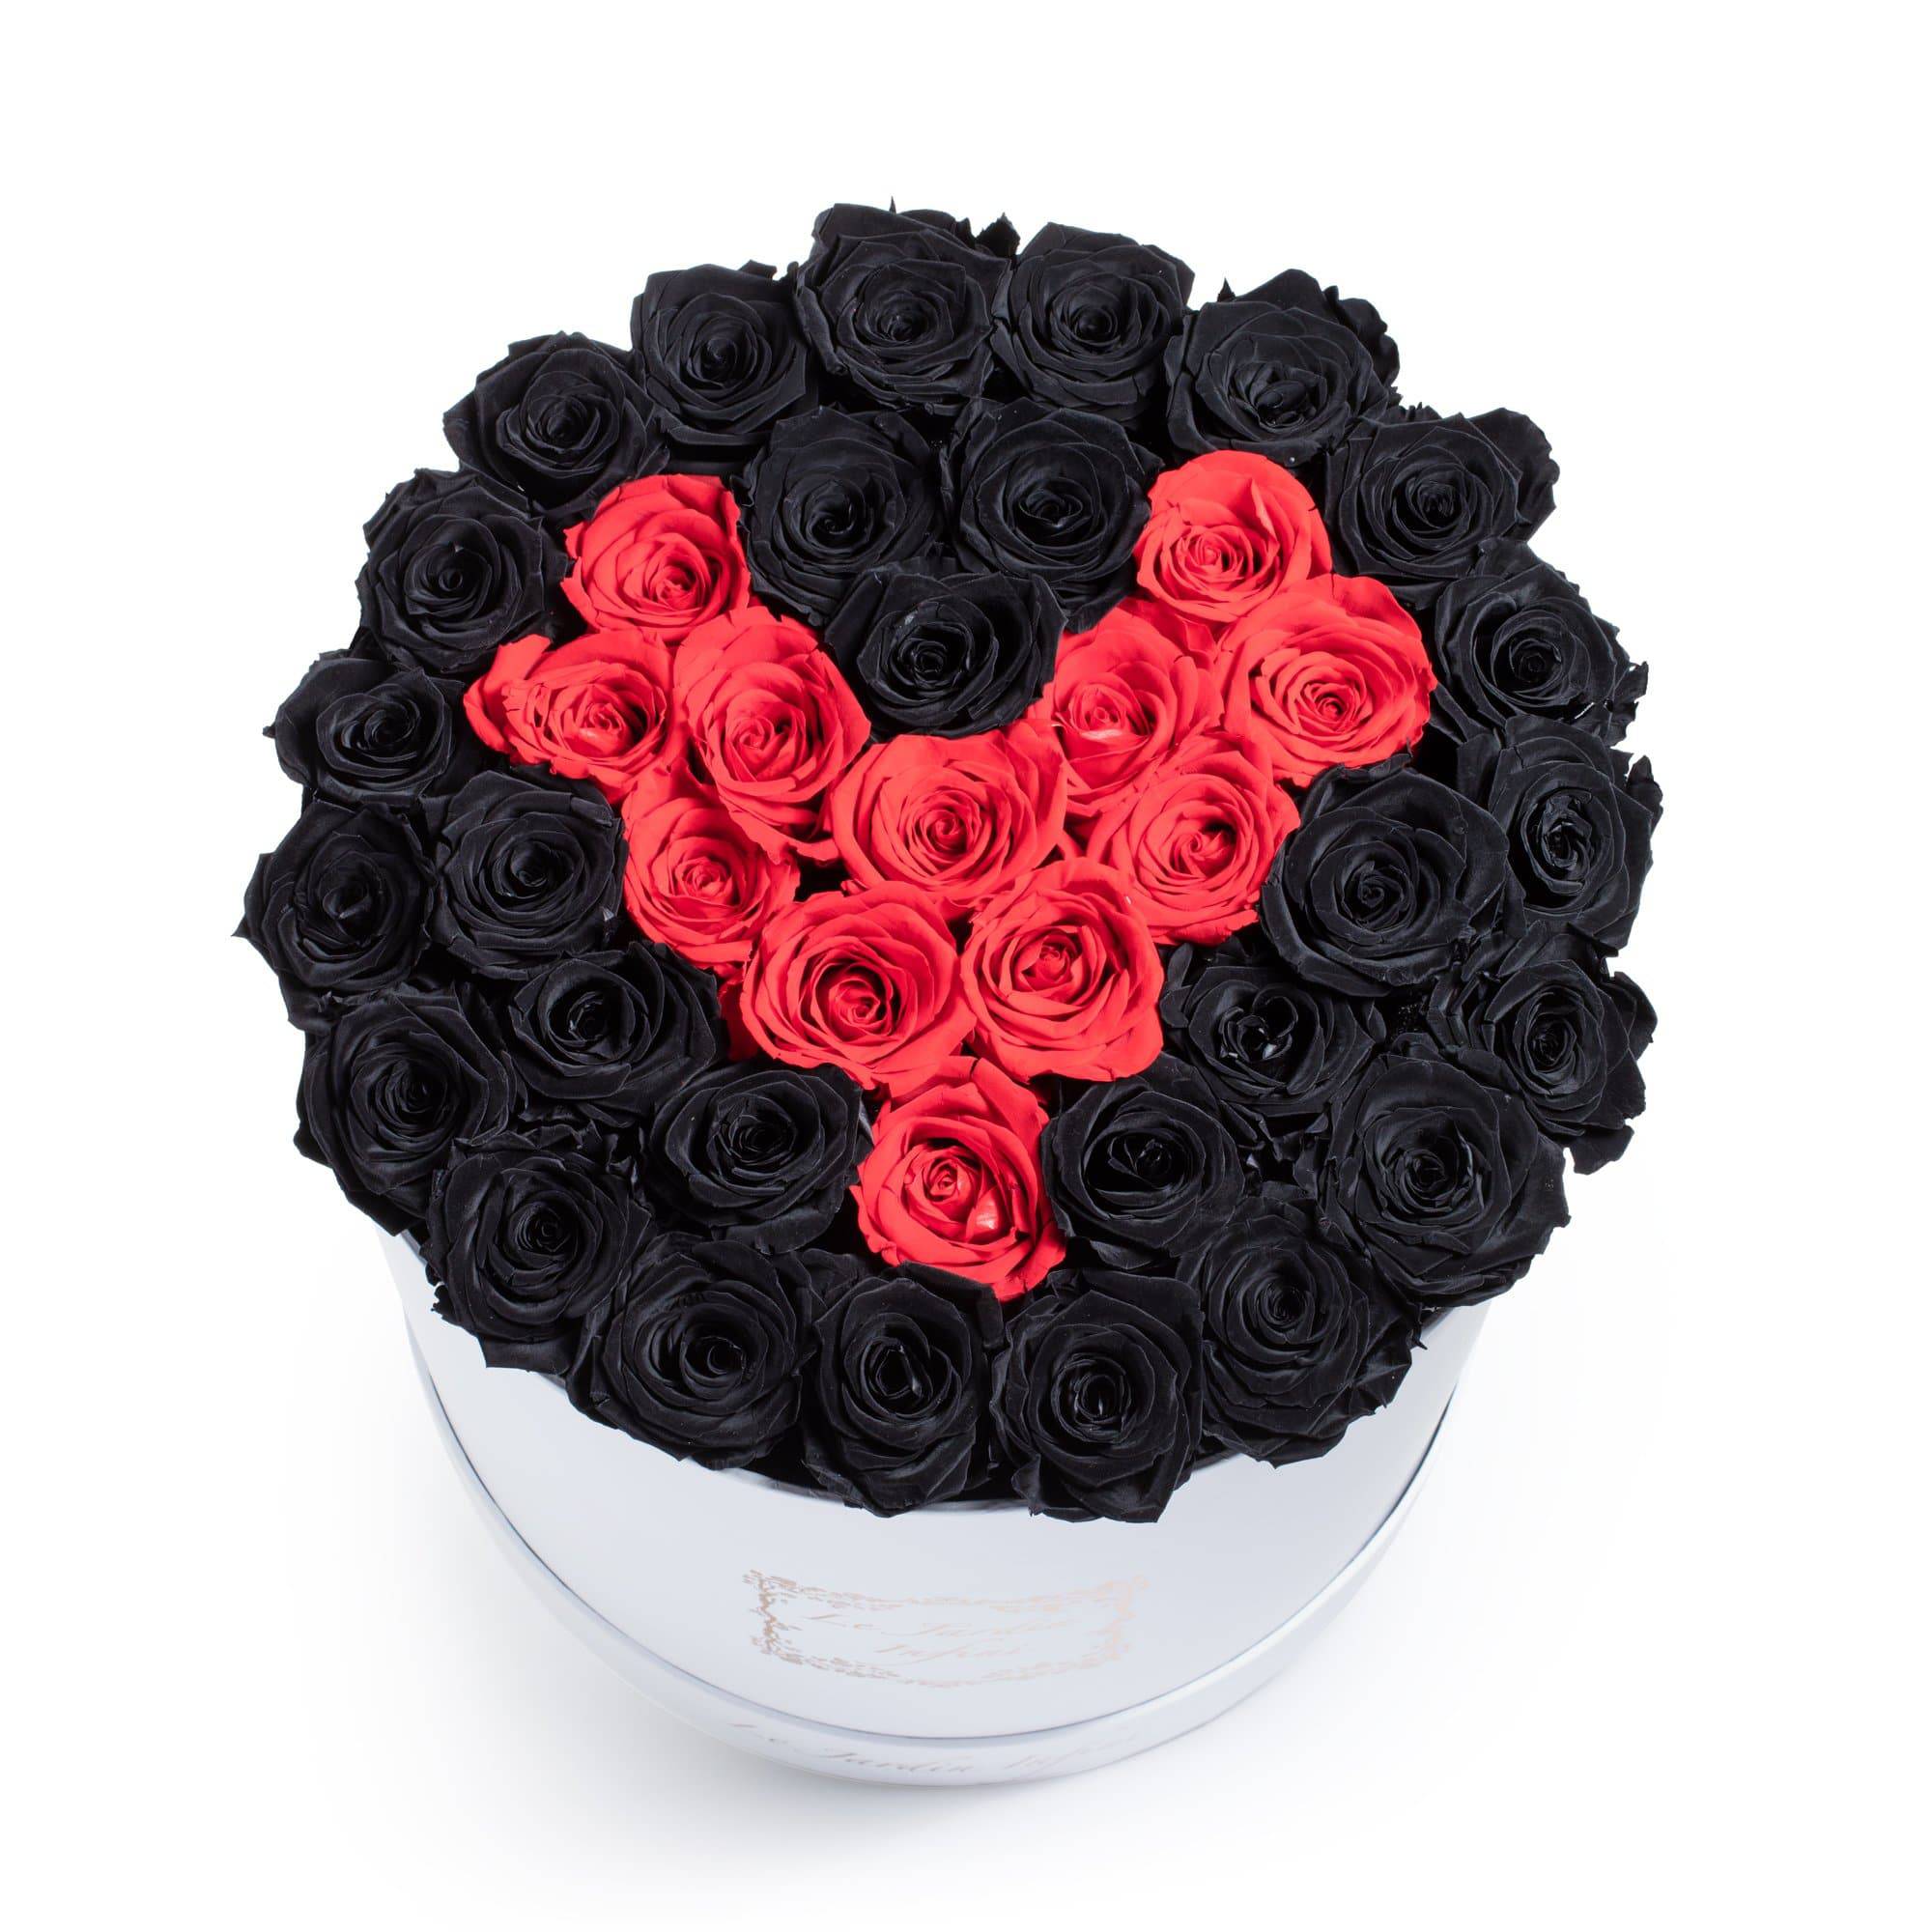 Black & Red Heart Preserved Roses - Large Round White Box